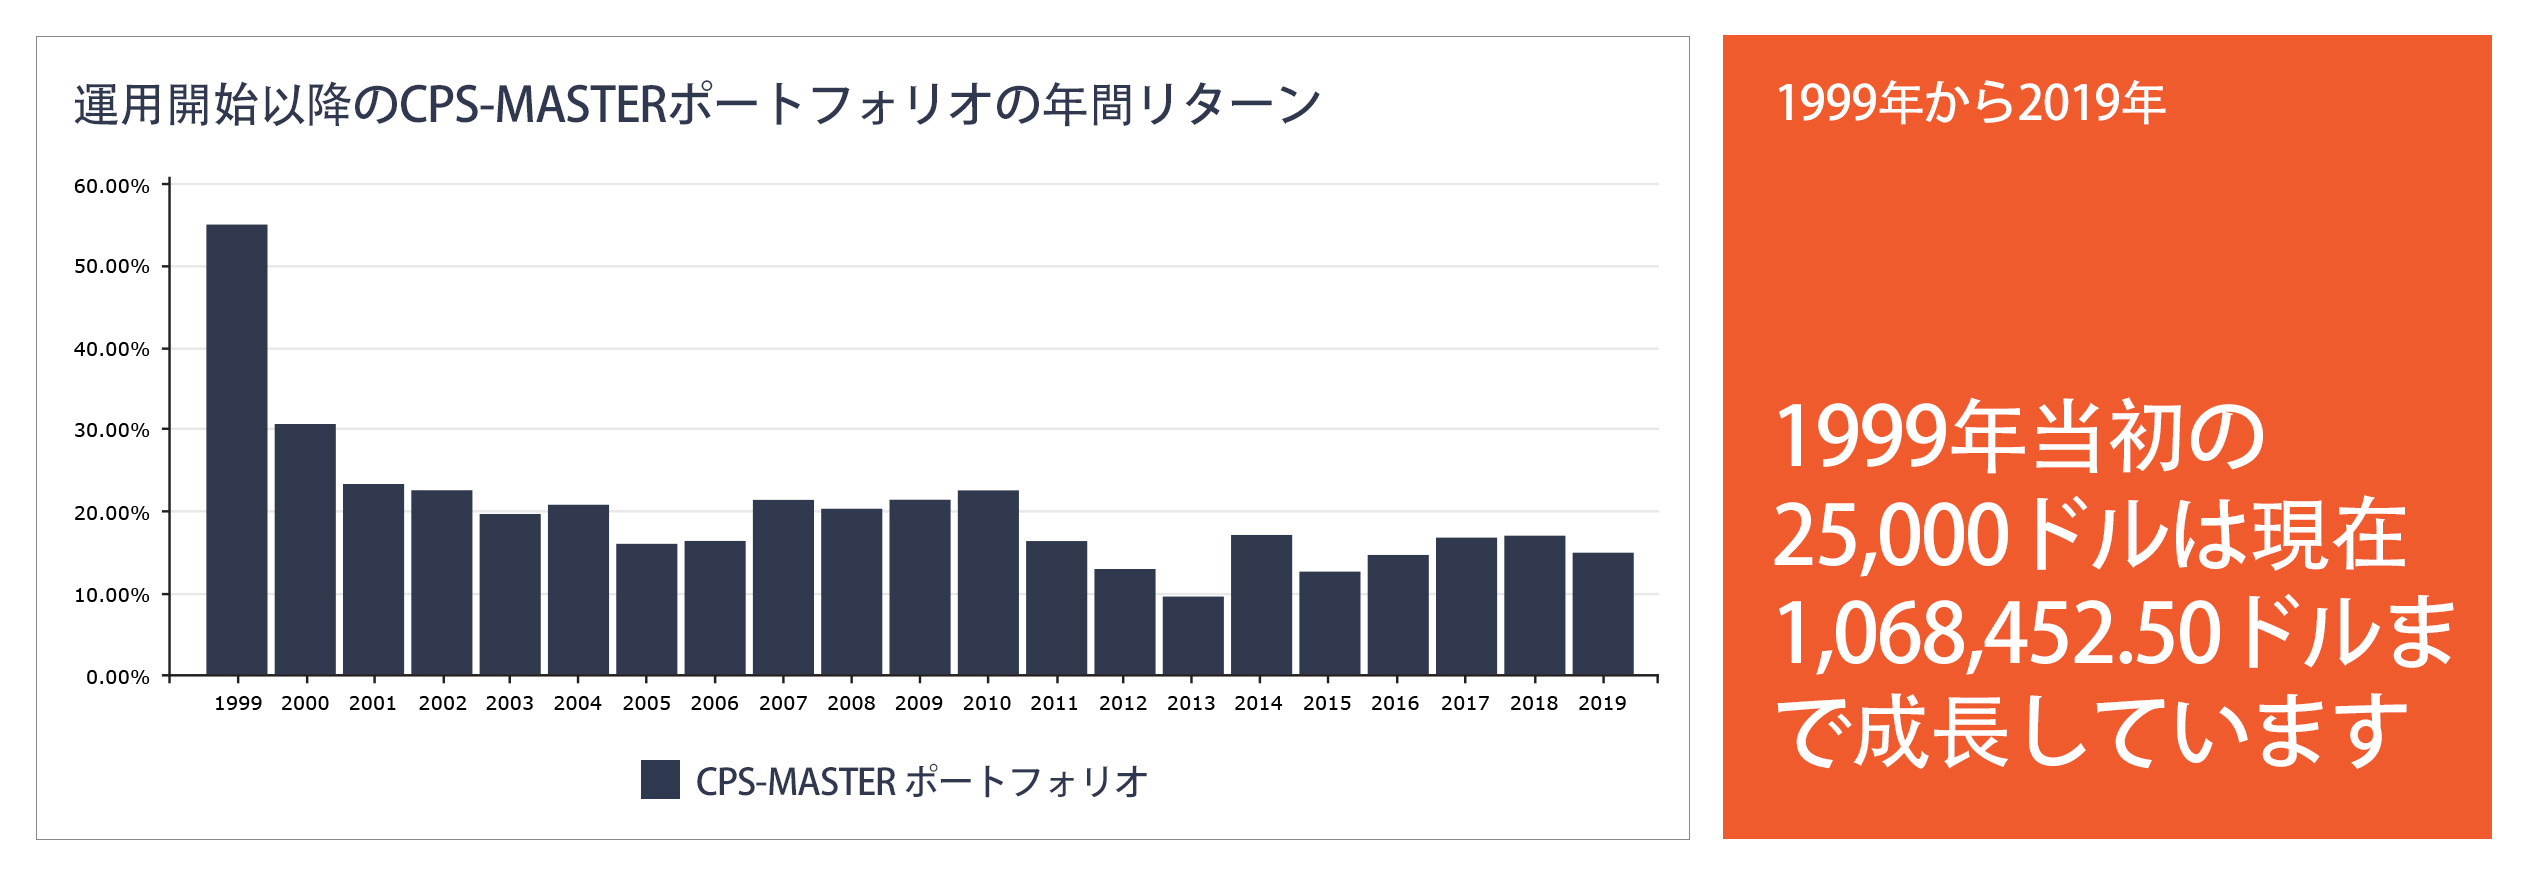 cps-master-no-losing-year-since-inception-2019-japanese